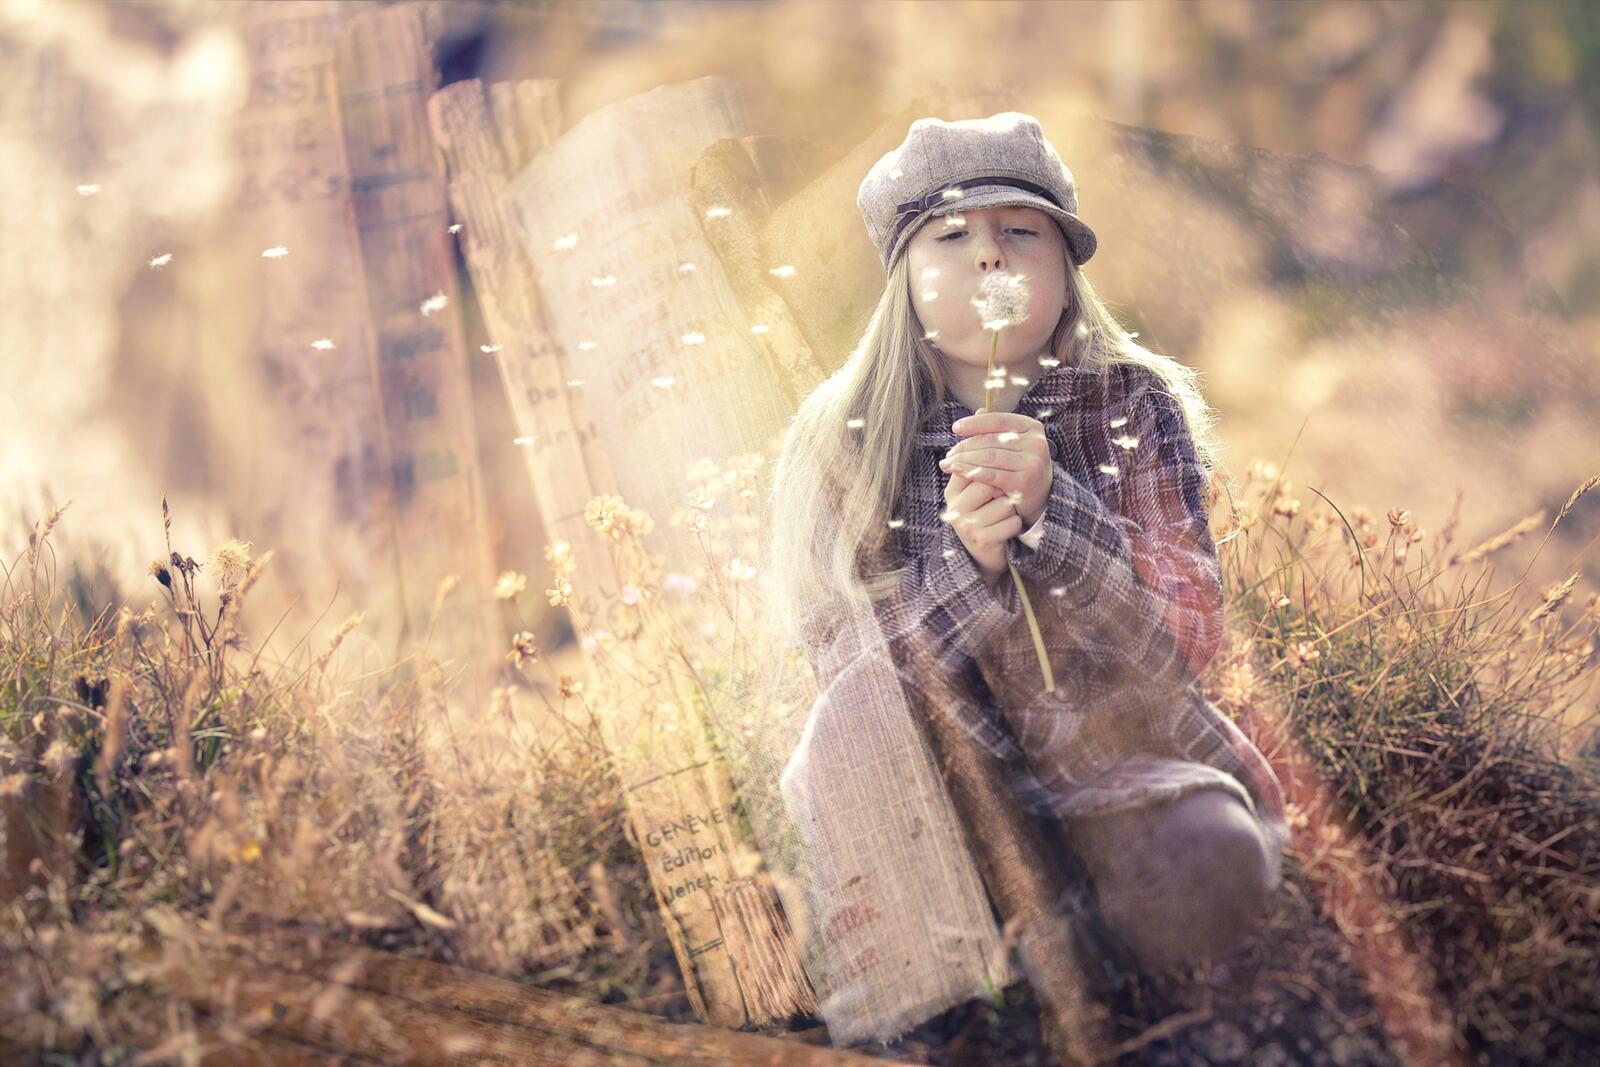 Free photo A little girl in an overcoat blows dandelion seeds